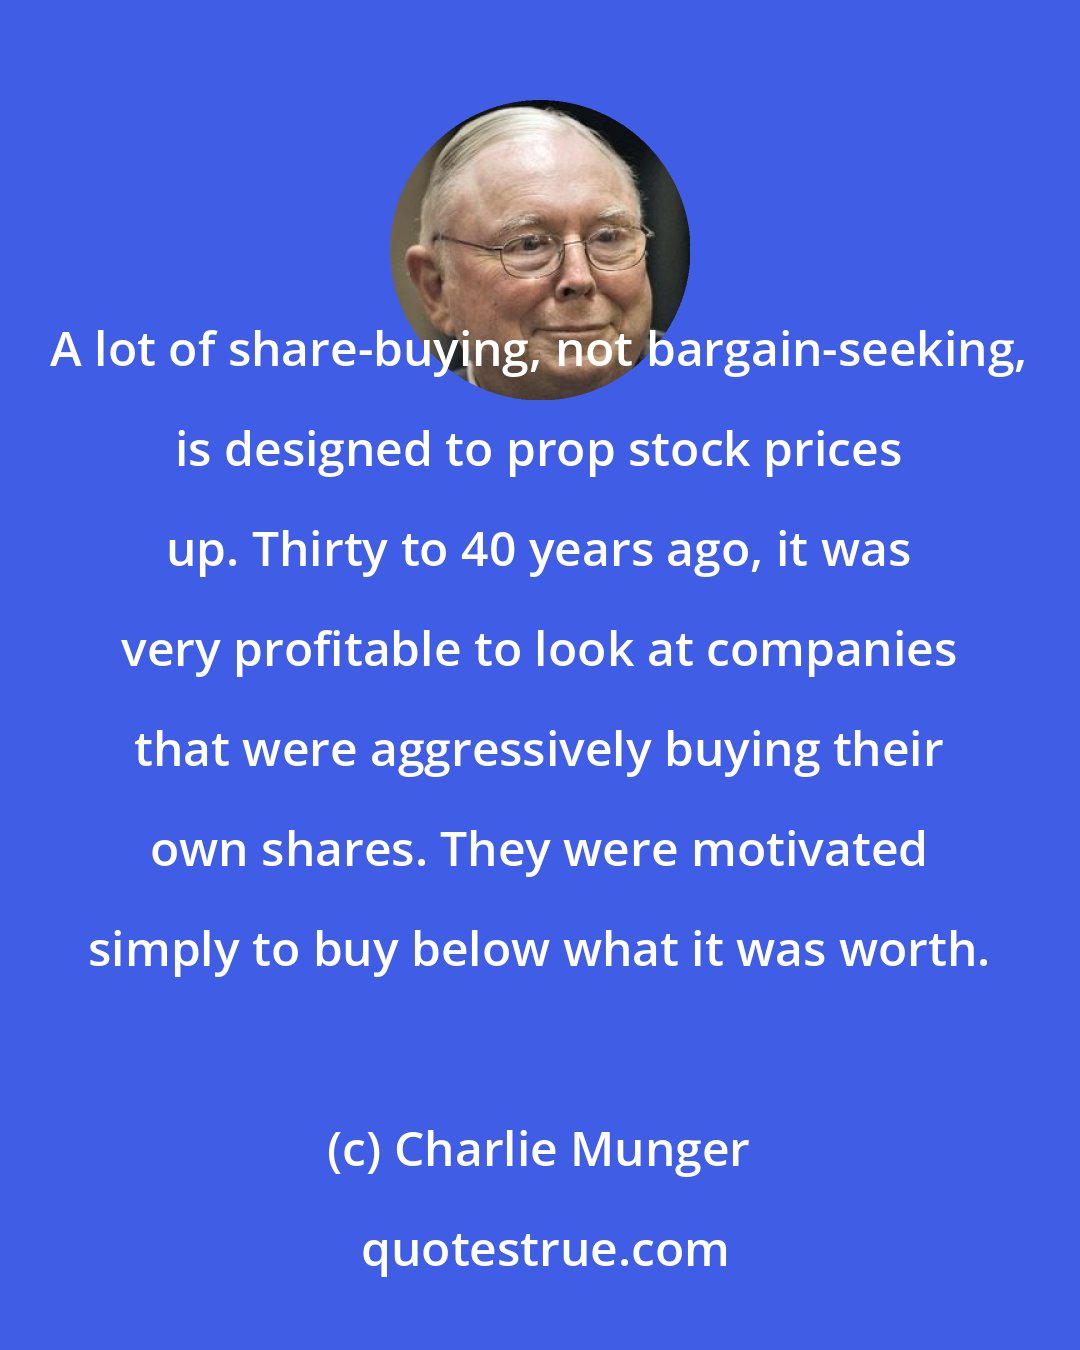 Charlie Munger: A lot of share-buying, not bargain-seeking, is designed to prop stock prices up. Thirty to 40 years ago, it was very profitable to look at companies that were aggressively buying their own shares. They were motivated simply to buy below what it was worth.